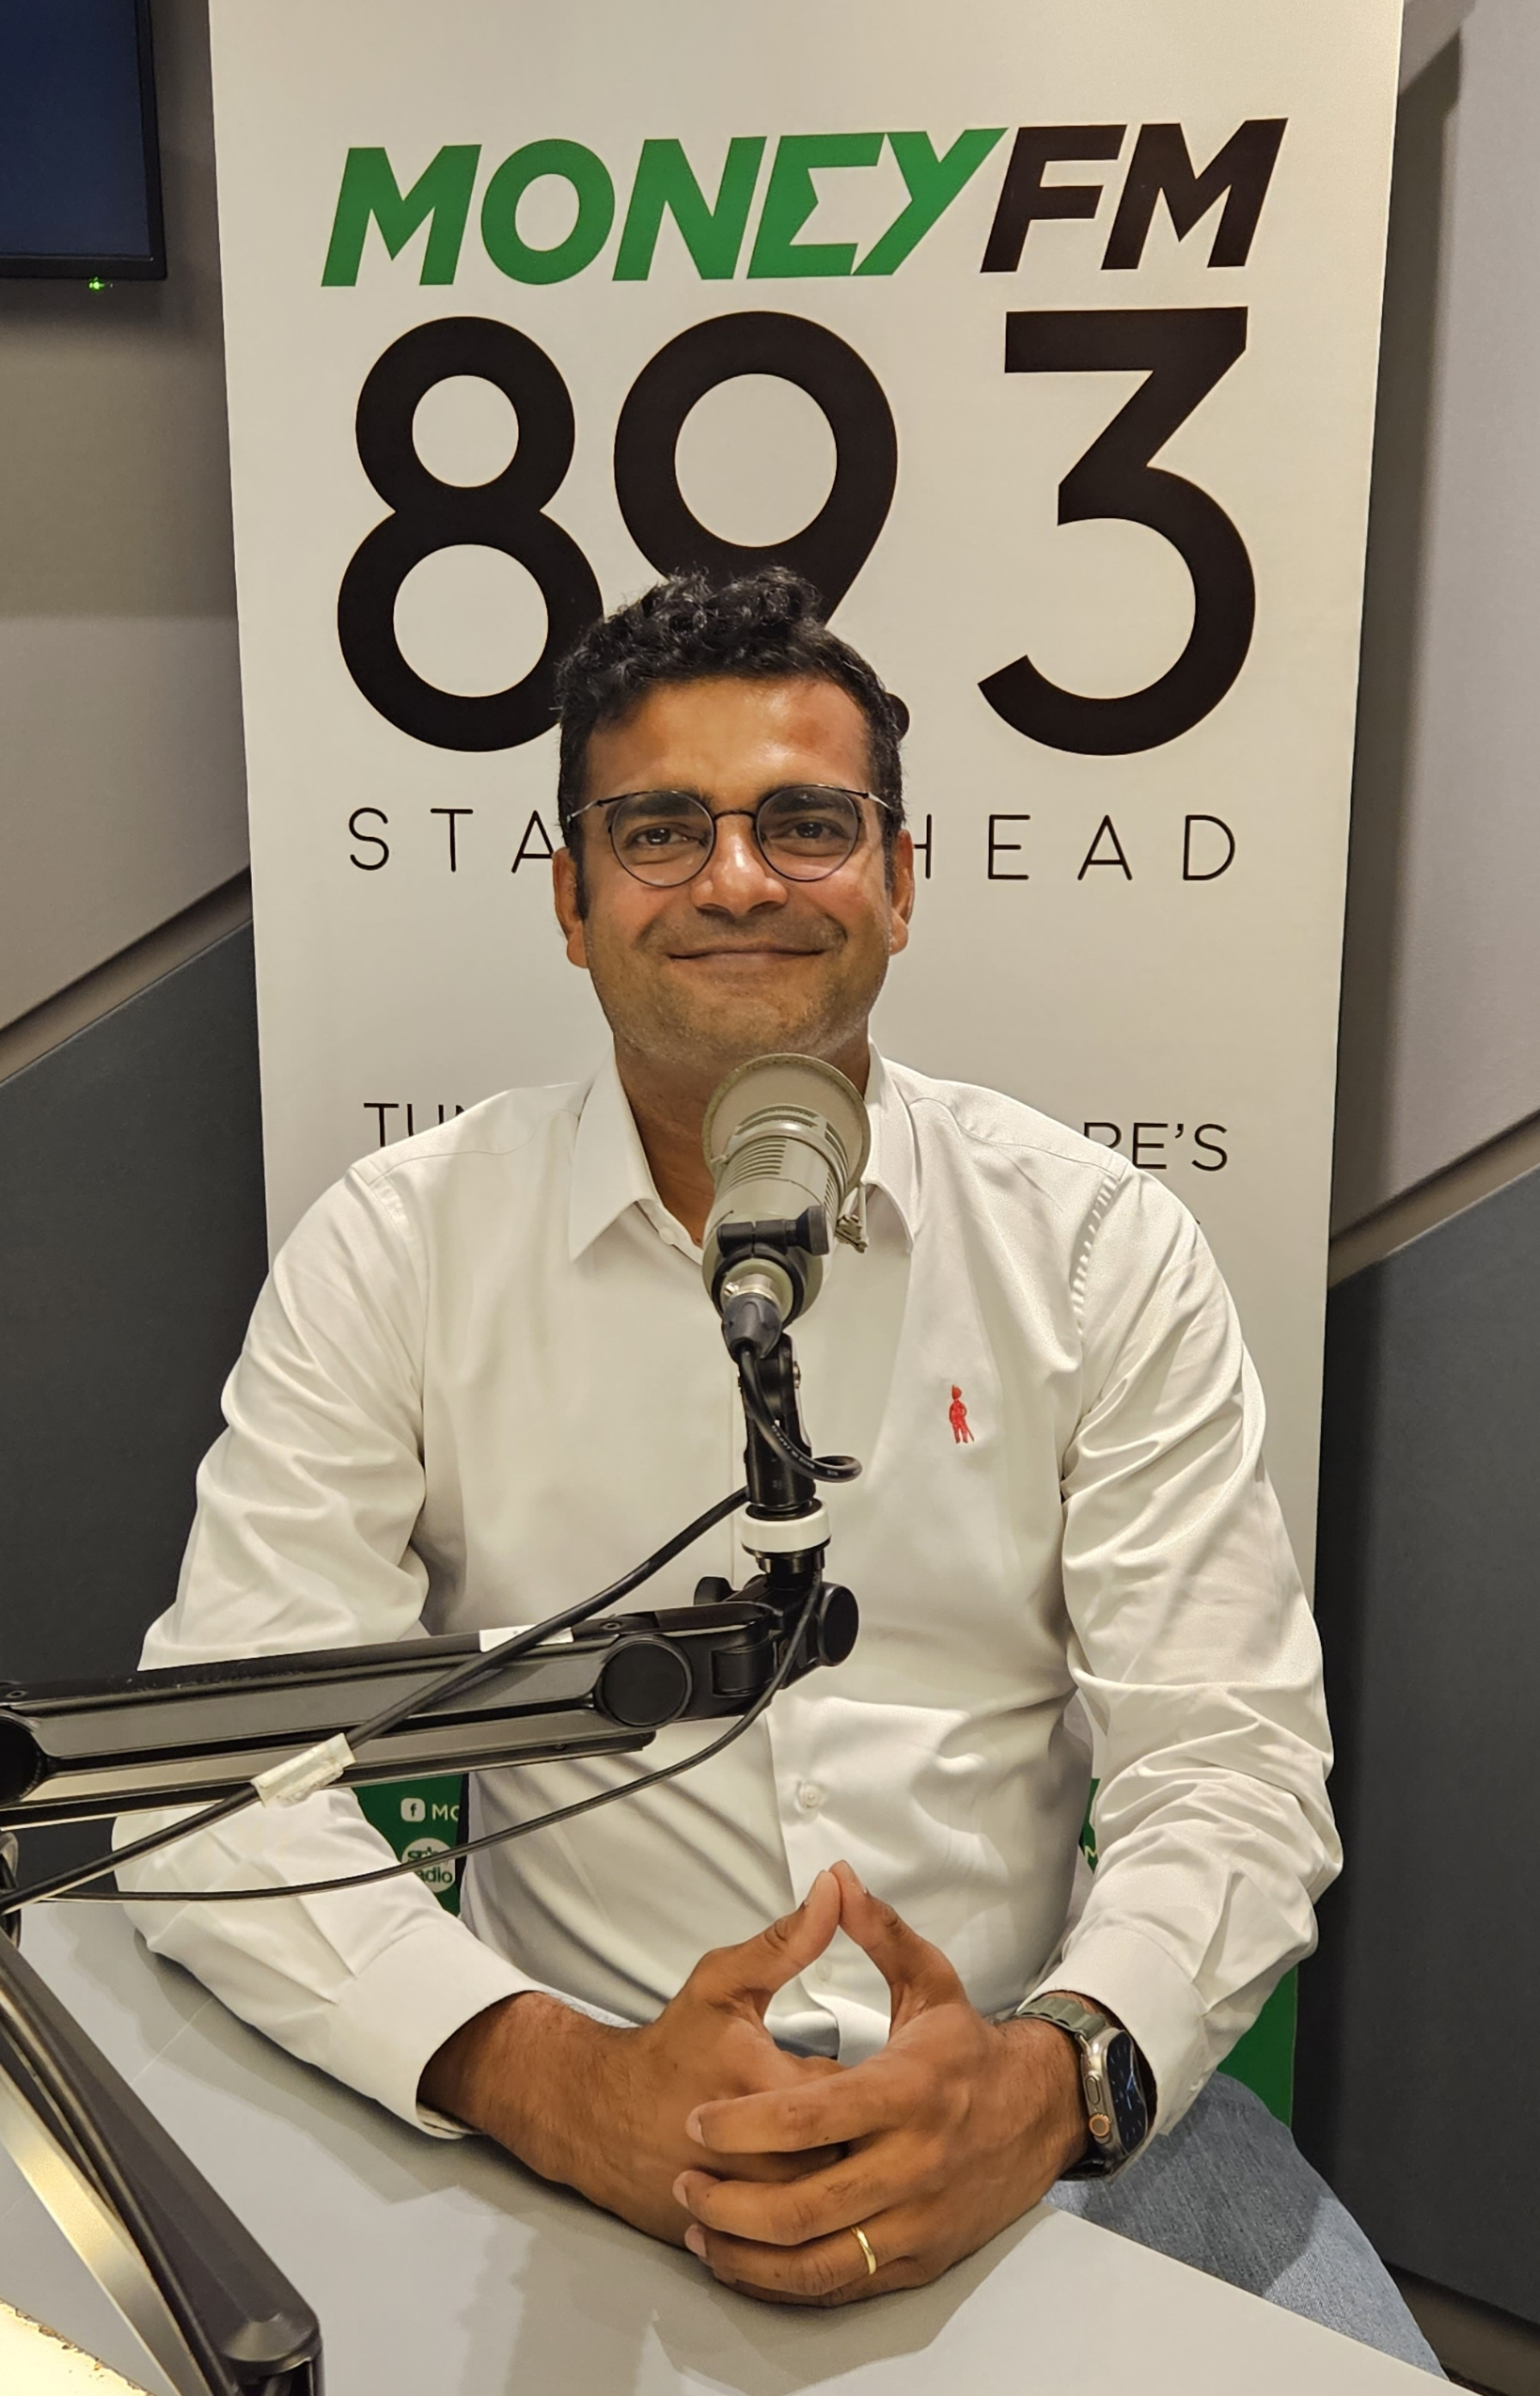 Saturday Mornings: Jacob Puthenparambil talks about the success of his Redhill Global Communications Agency and the state of PR in Singapore